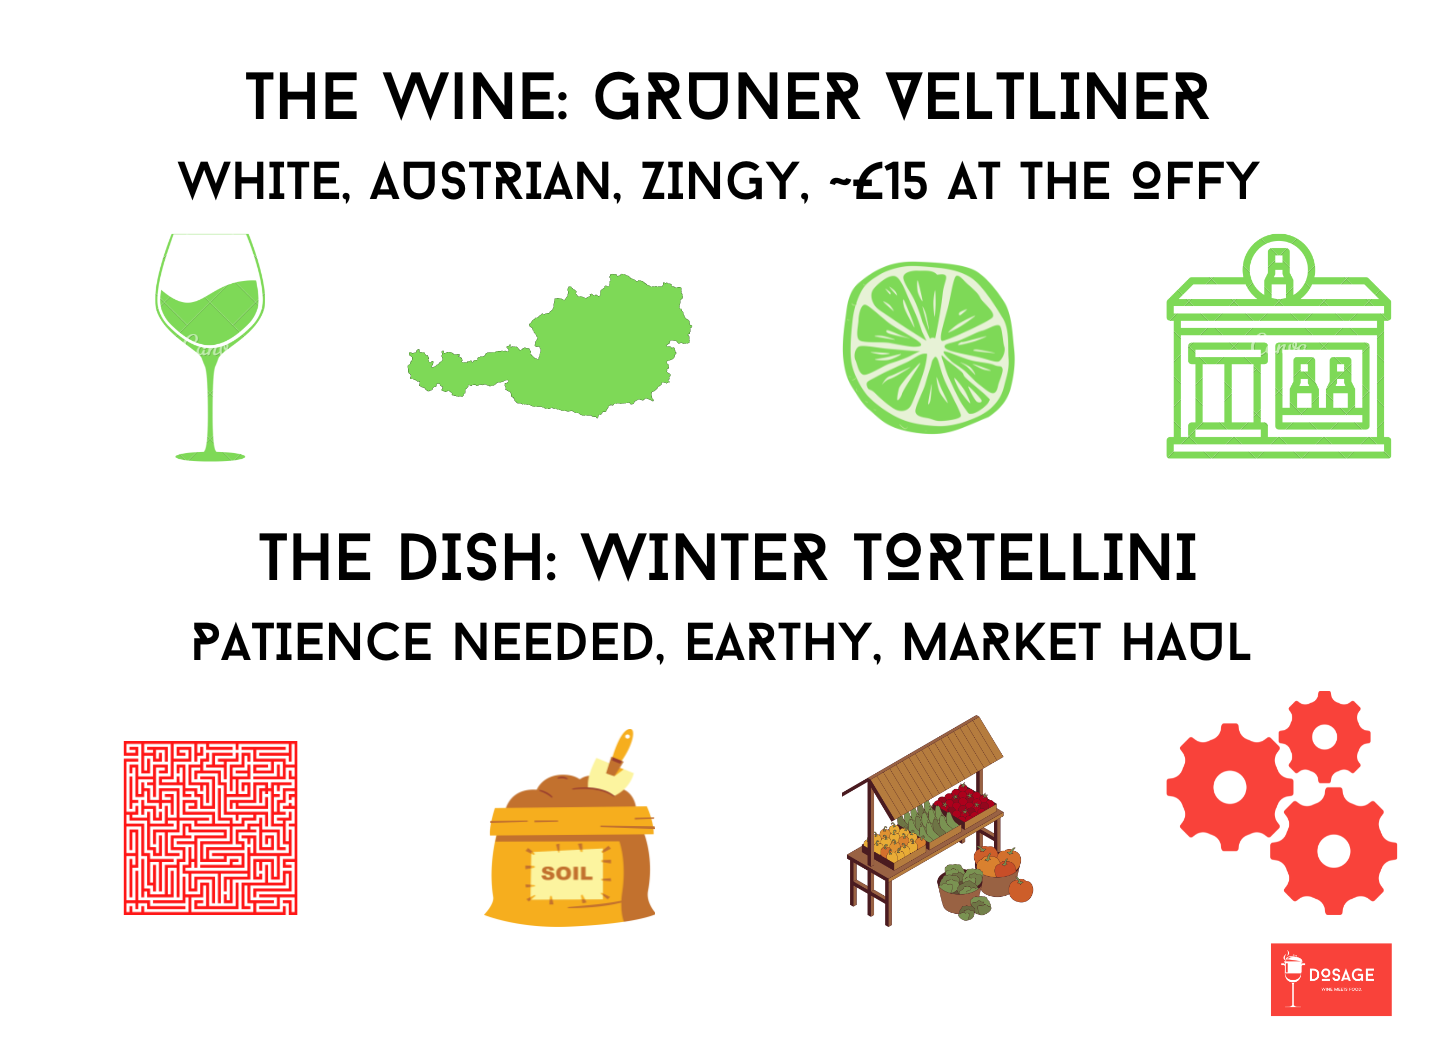 Description of how well gruner veltliner pairs with a winter tortellini with mushroom. It's a zesty wine that shouldn't cost too much at a wine store that will go with this complicated but tasty recipe!